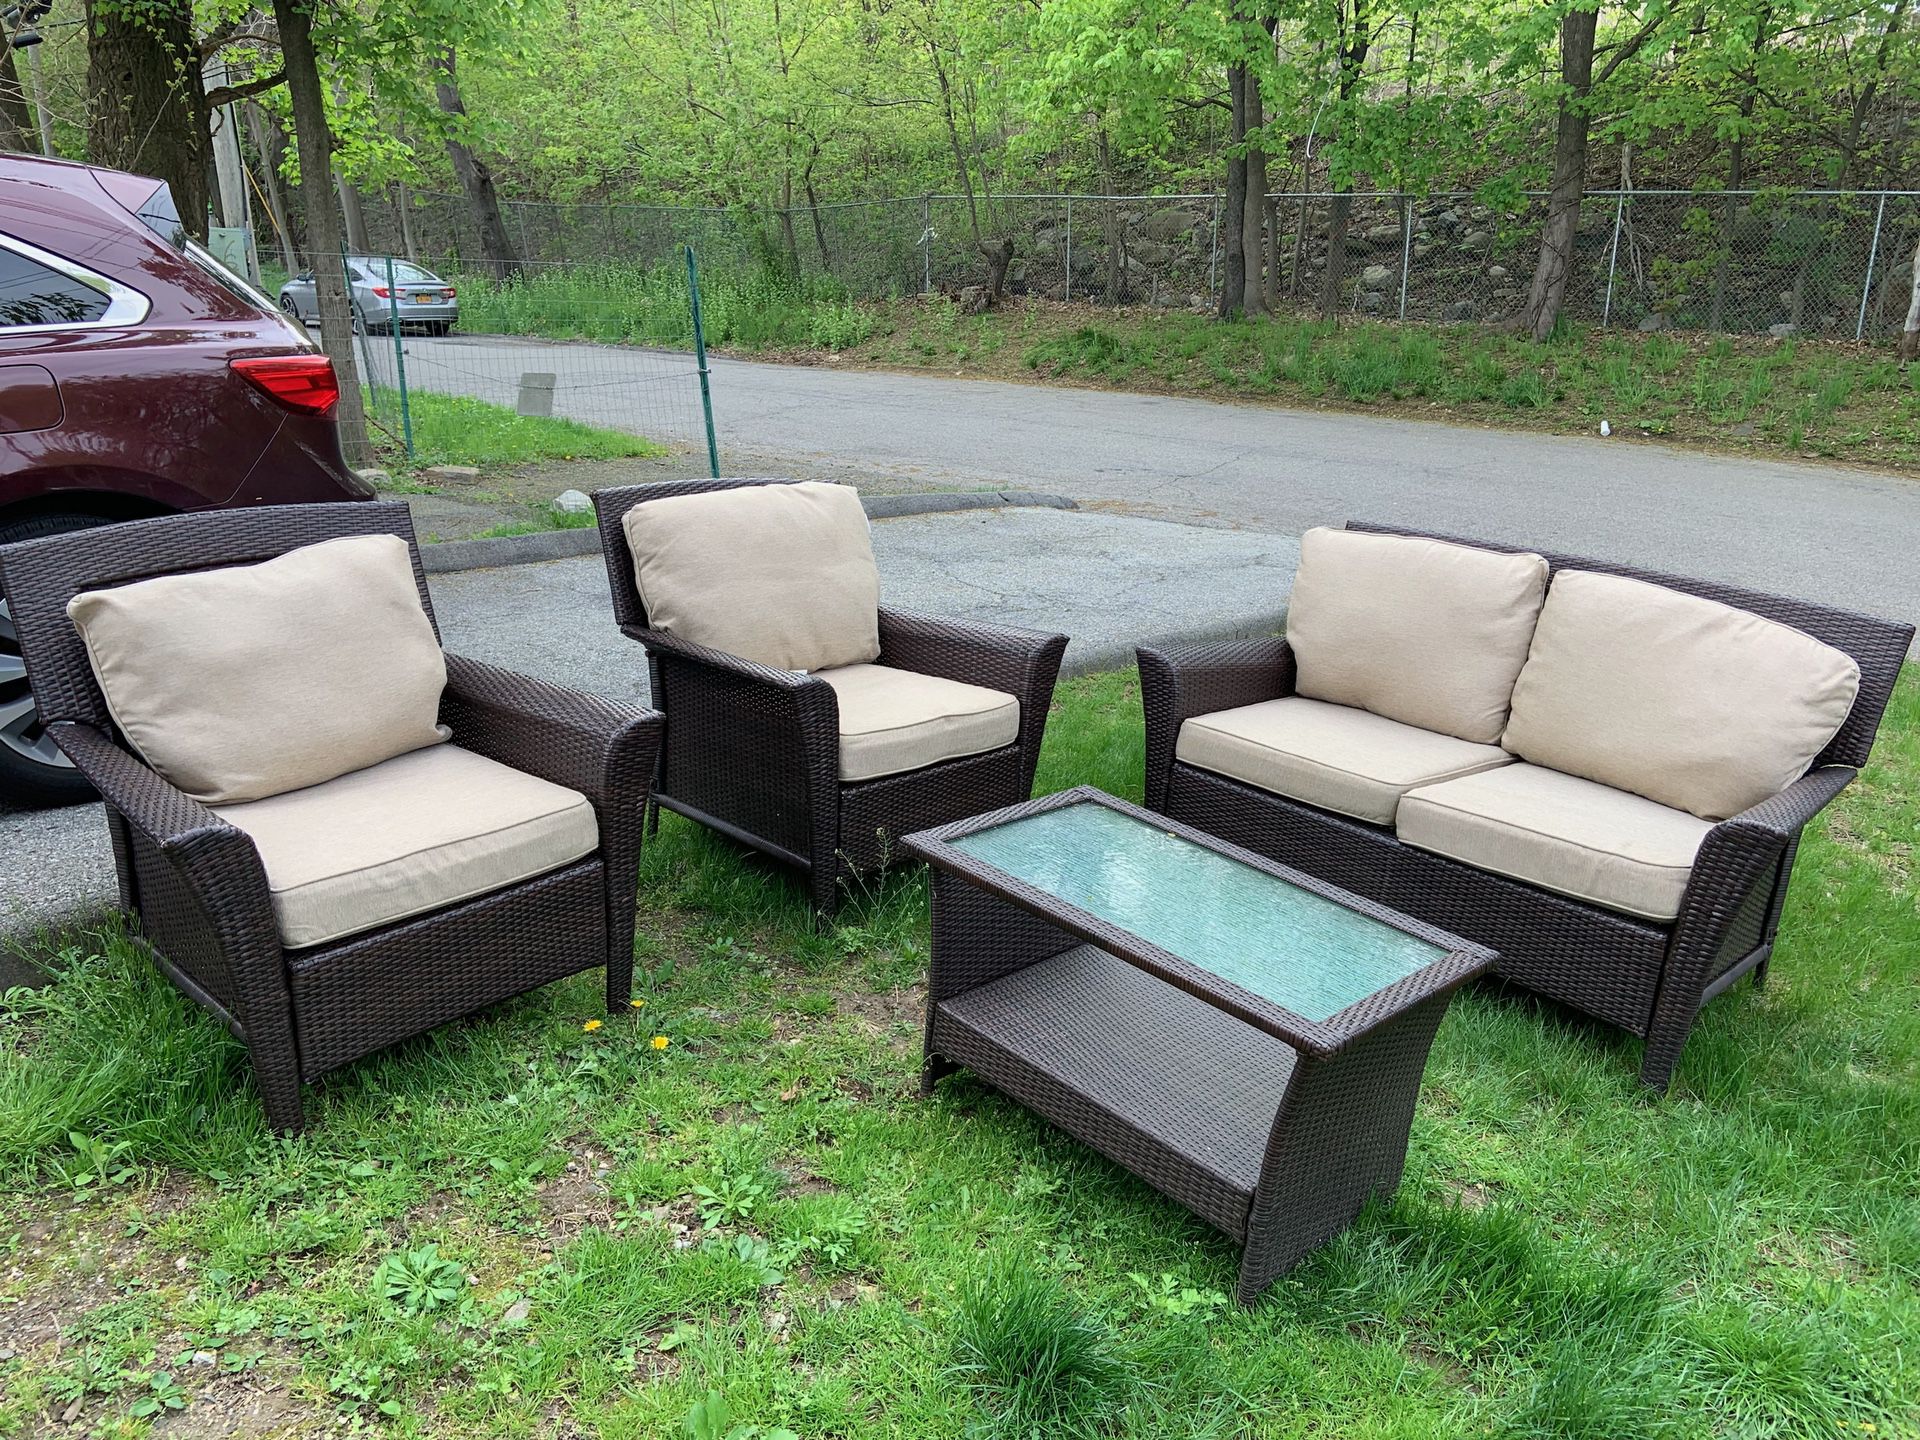 Patio furniture cushions! Used! Good conditions